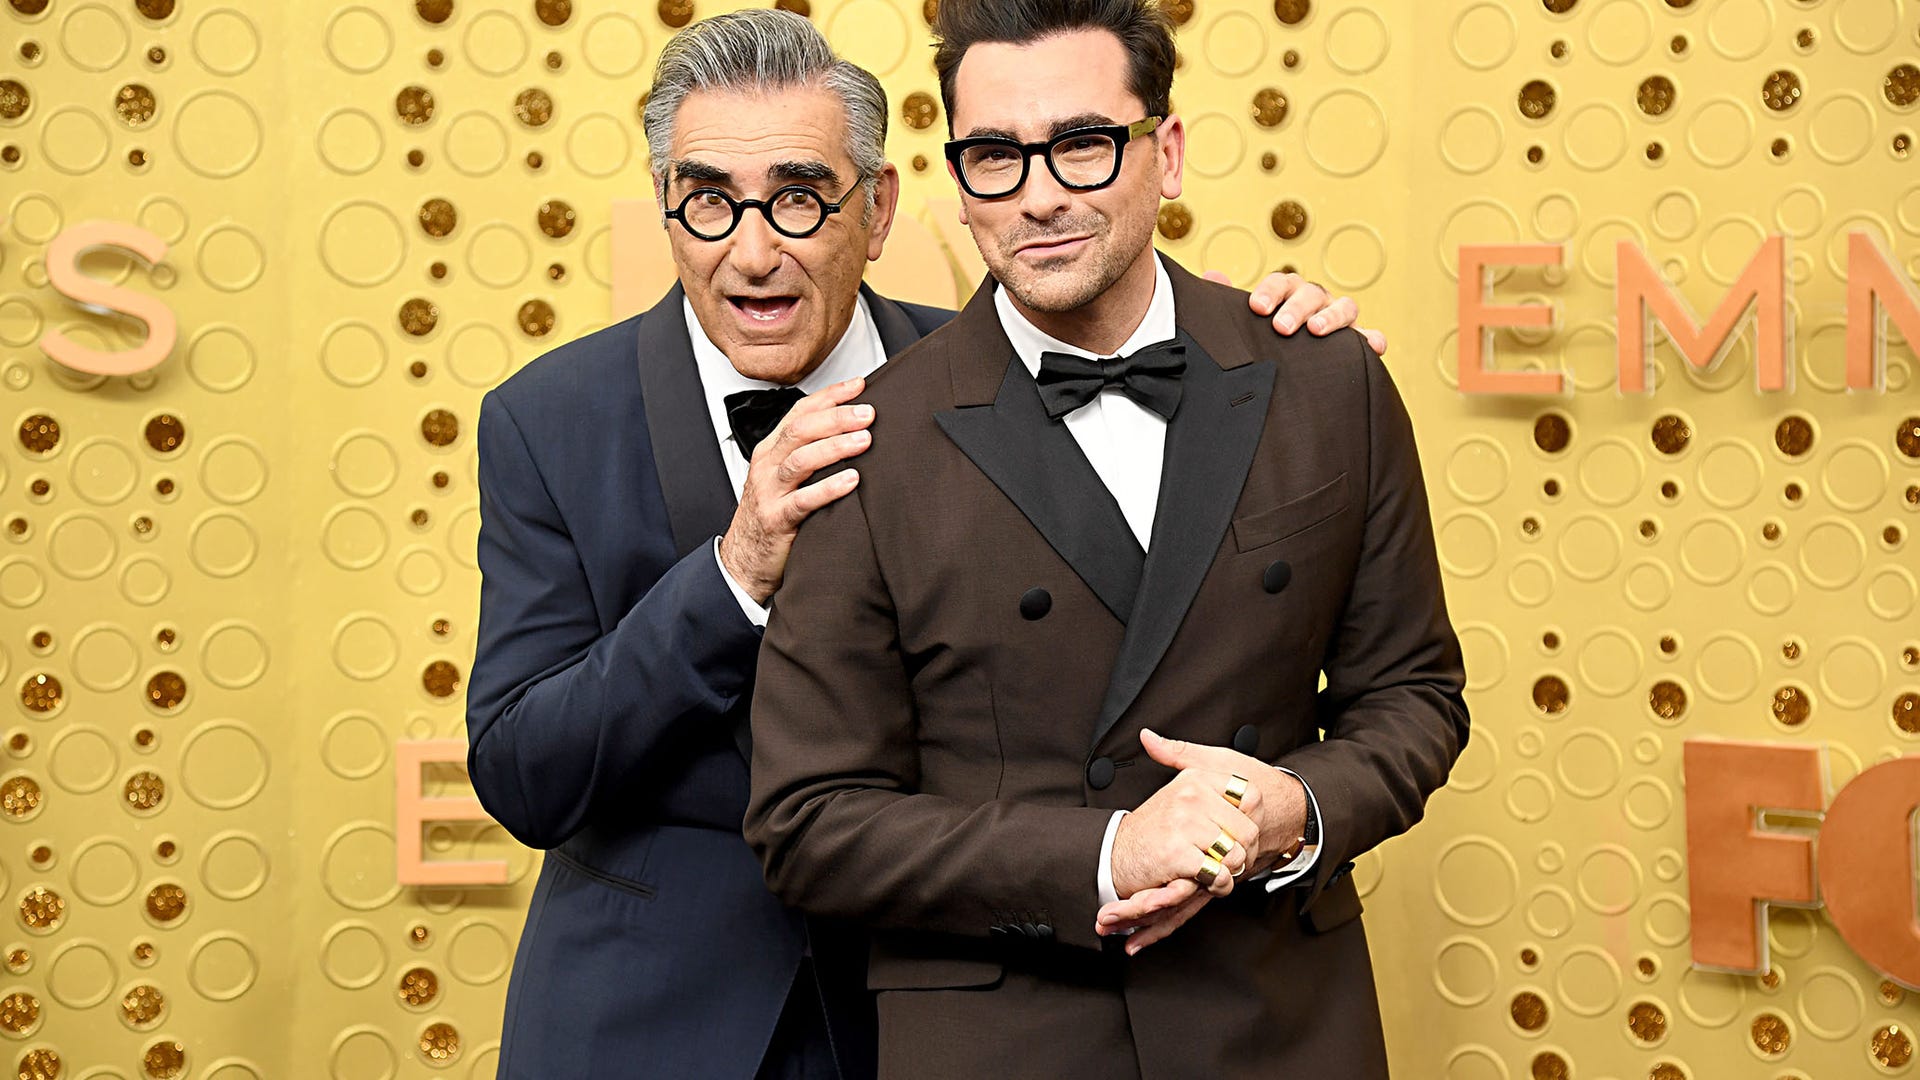 Eugene Levy and Dan Levy, Schitt's Creek at the Emmys